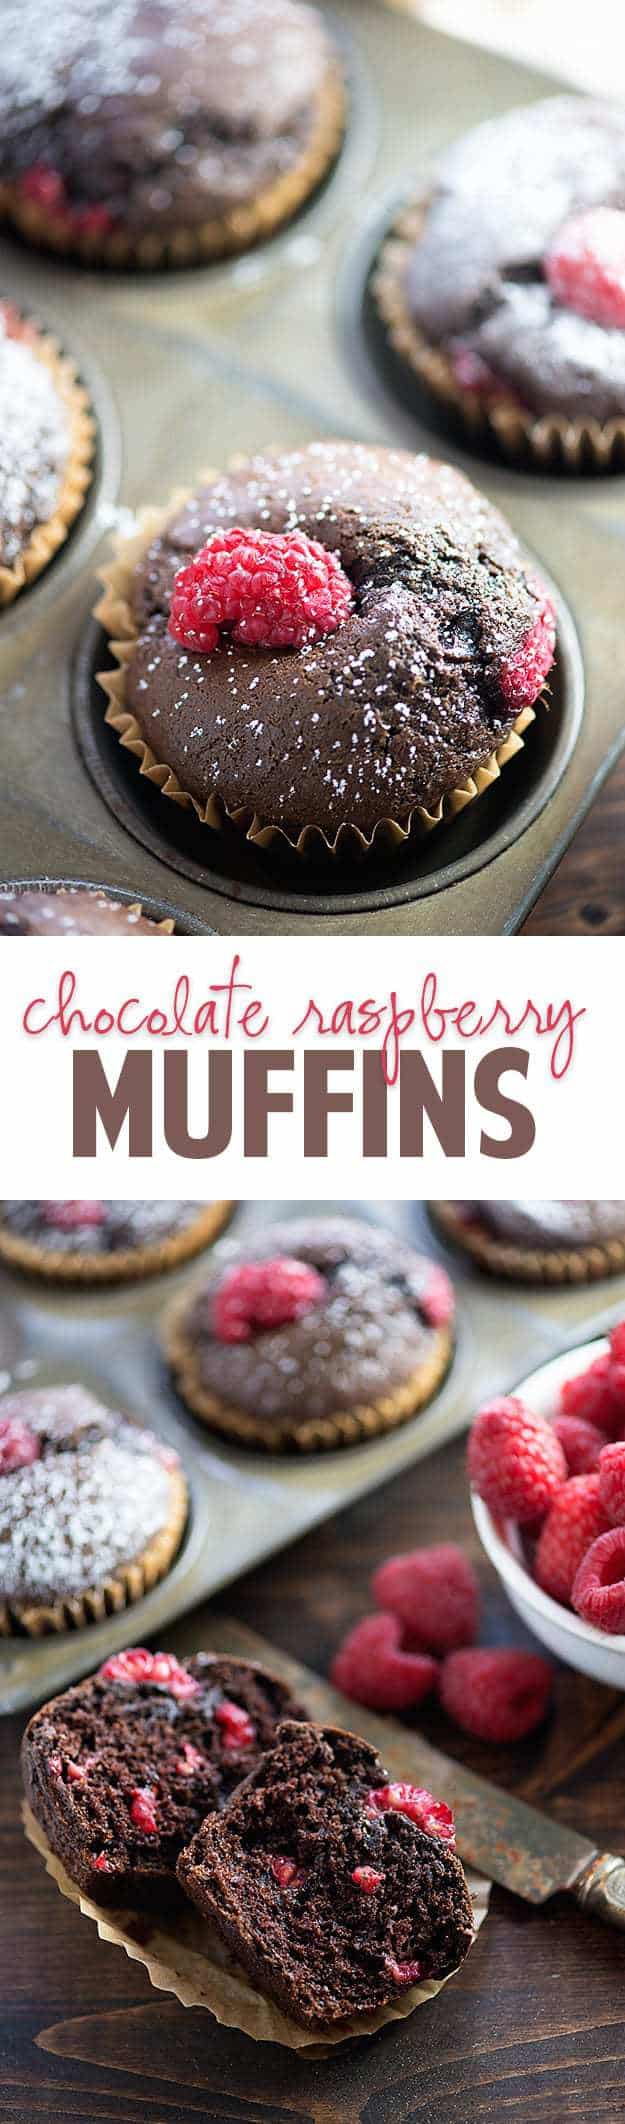 These chocolate raspberry muffins are super moist and fluffy. The bits of tart berries are perfect with the chocolate! 